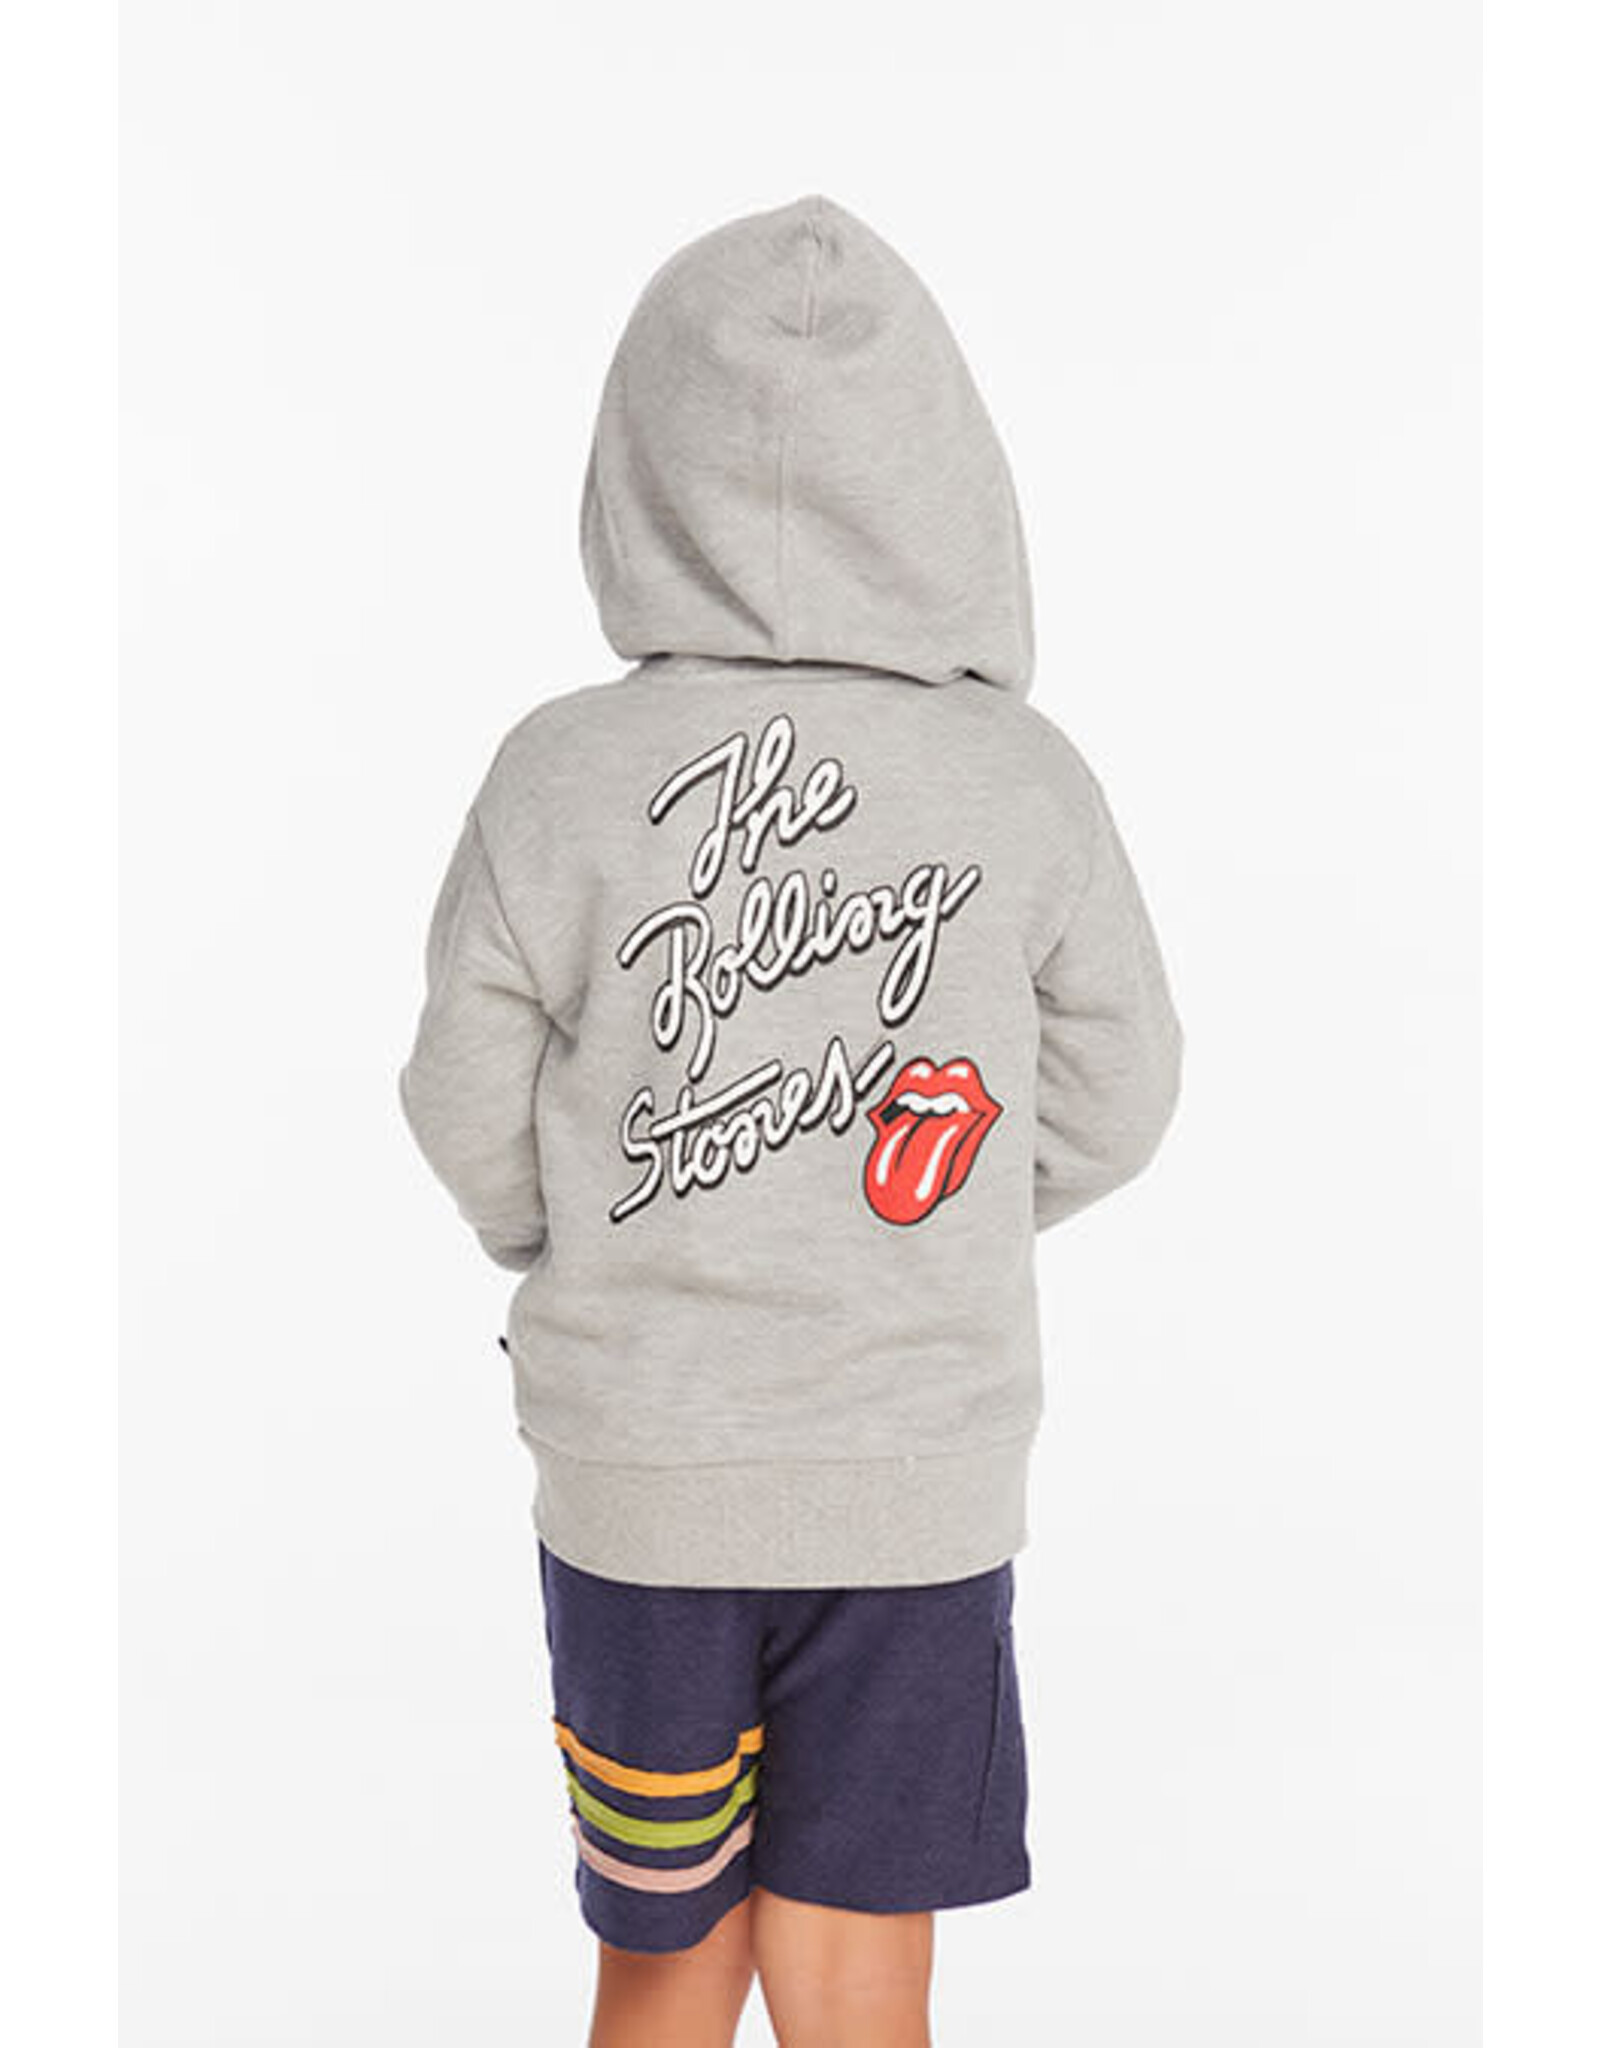 Chaser CHSR Rolling Stones Zip Up